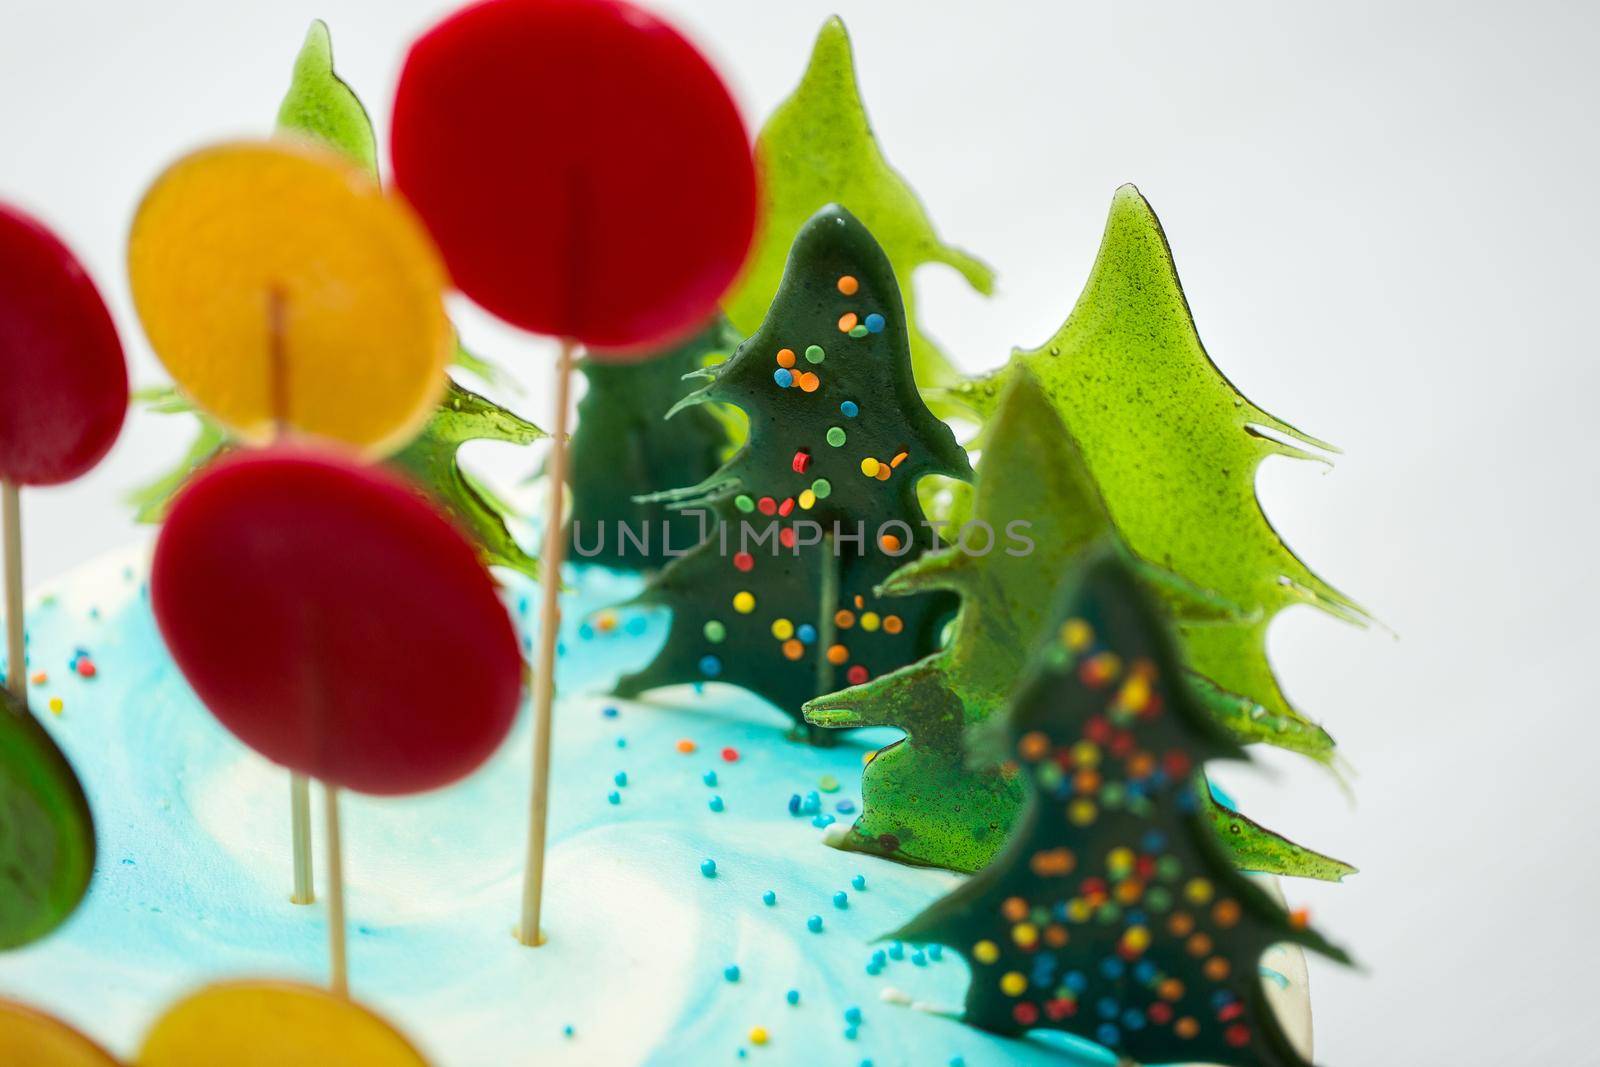 Lollipops are round and shaped like a Christmas tree on a cake.